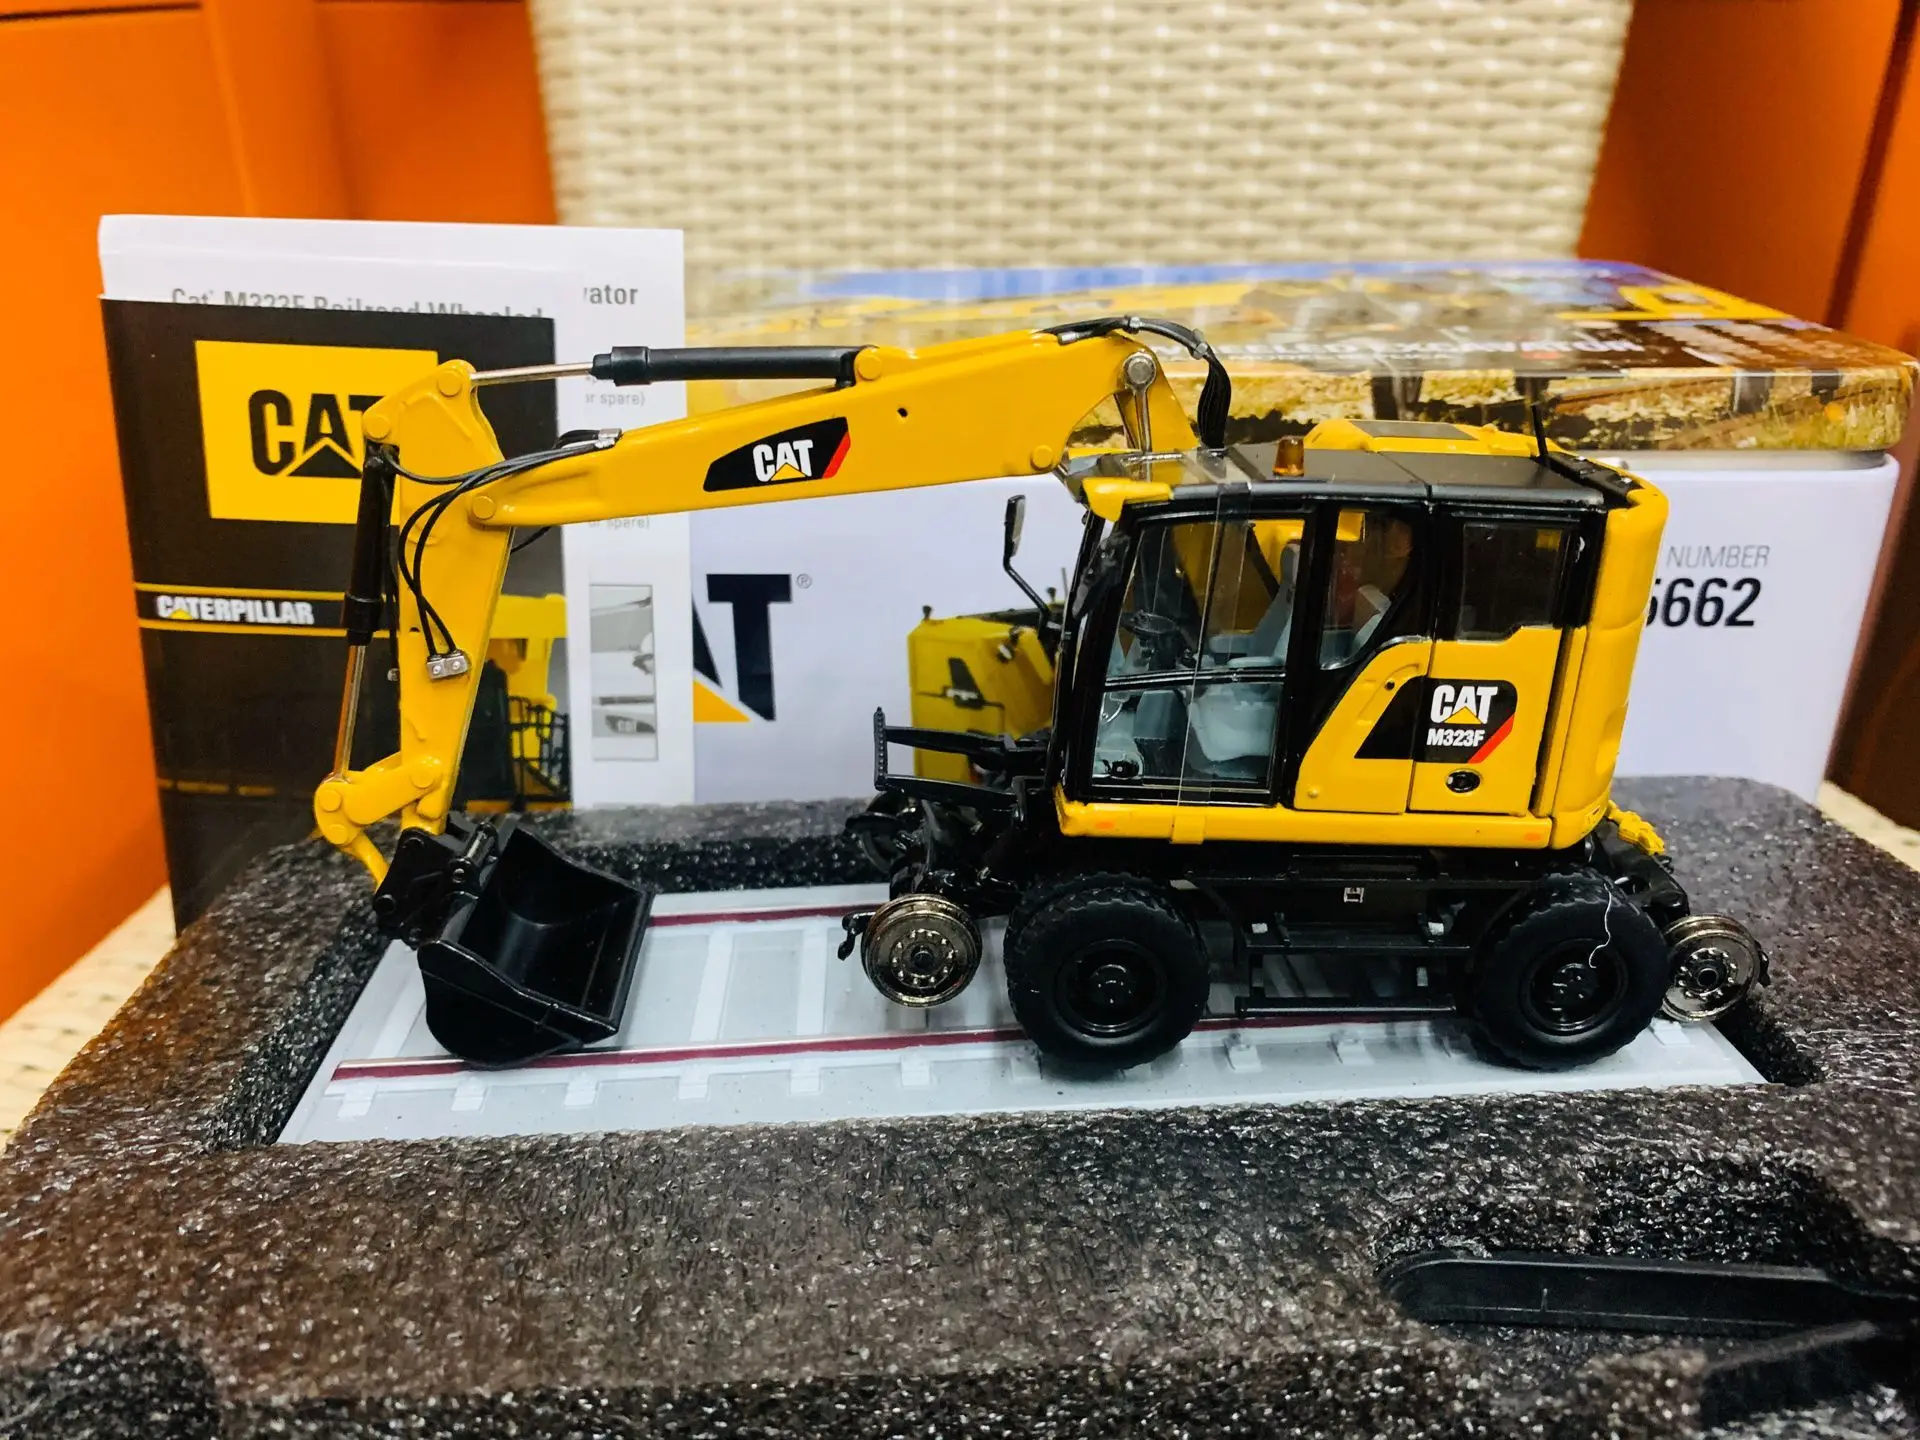 1/50 SCALE CAT M323F RAILROAD WHEELED EXCAVATOR BY DIECAST MASTERS 85662